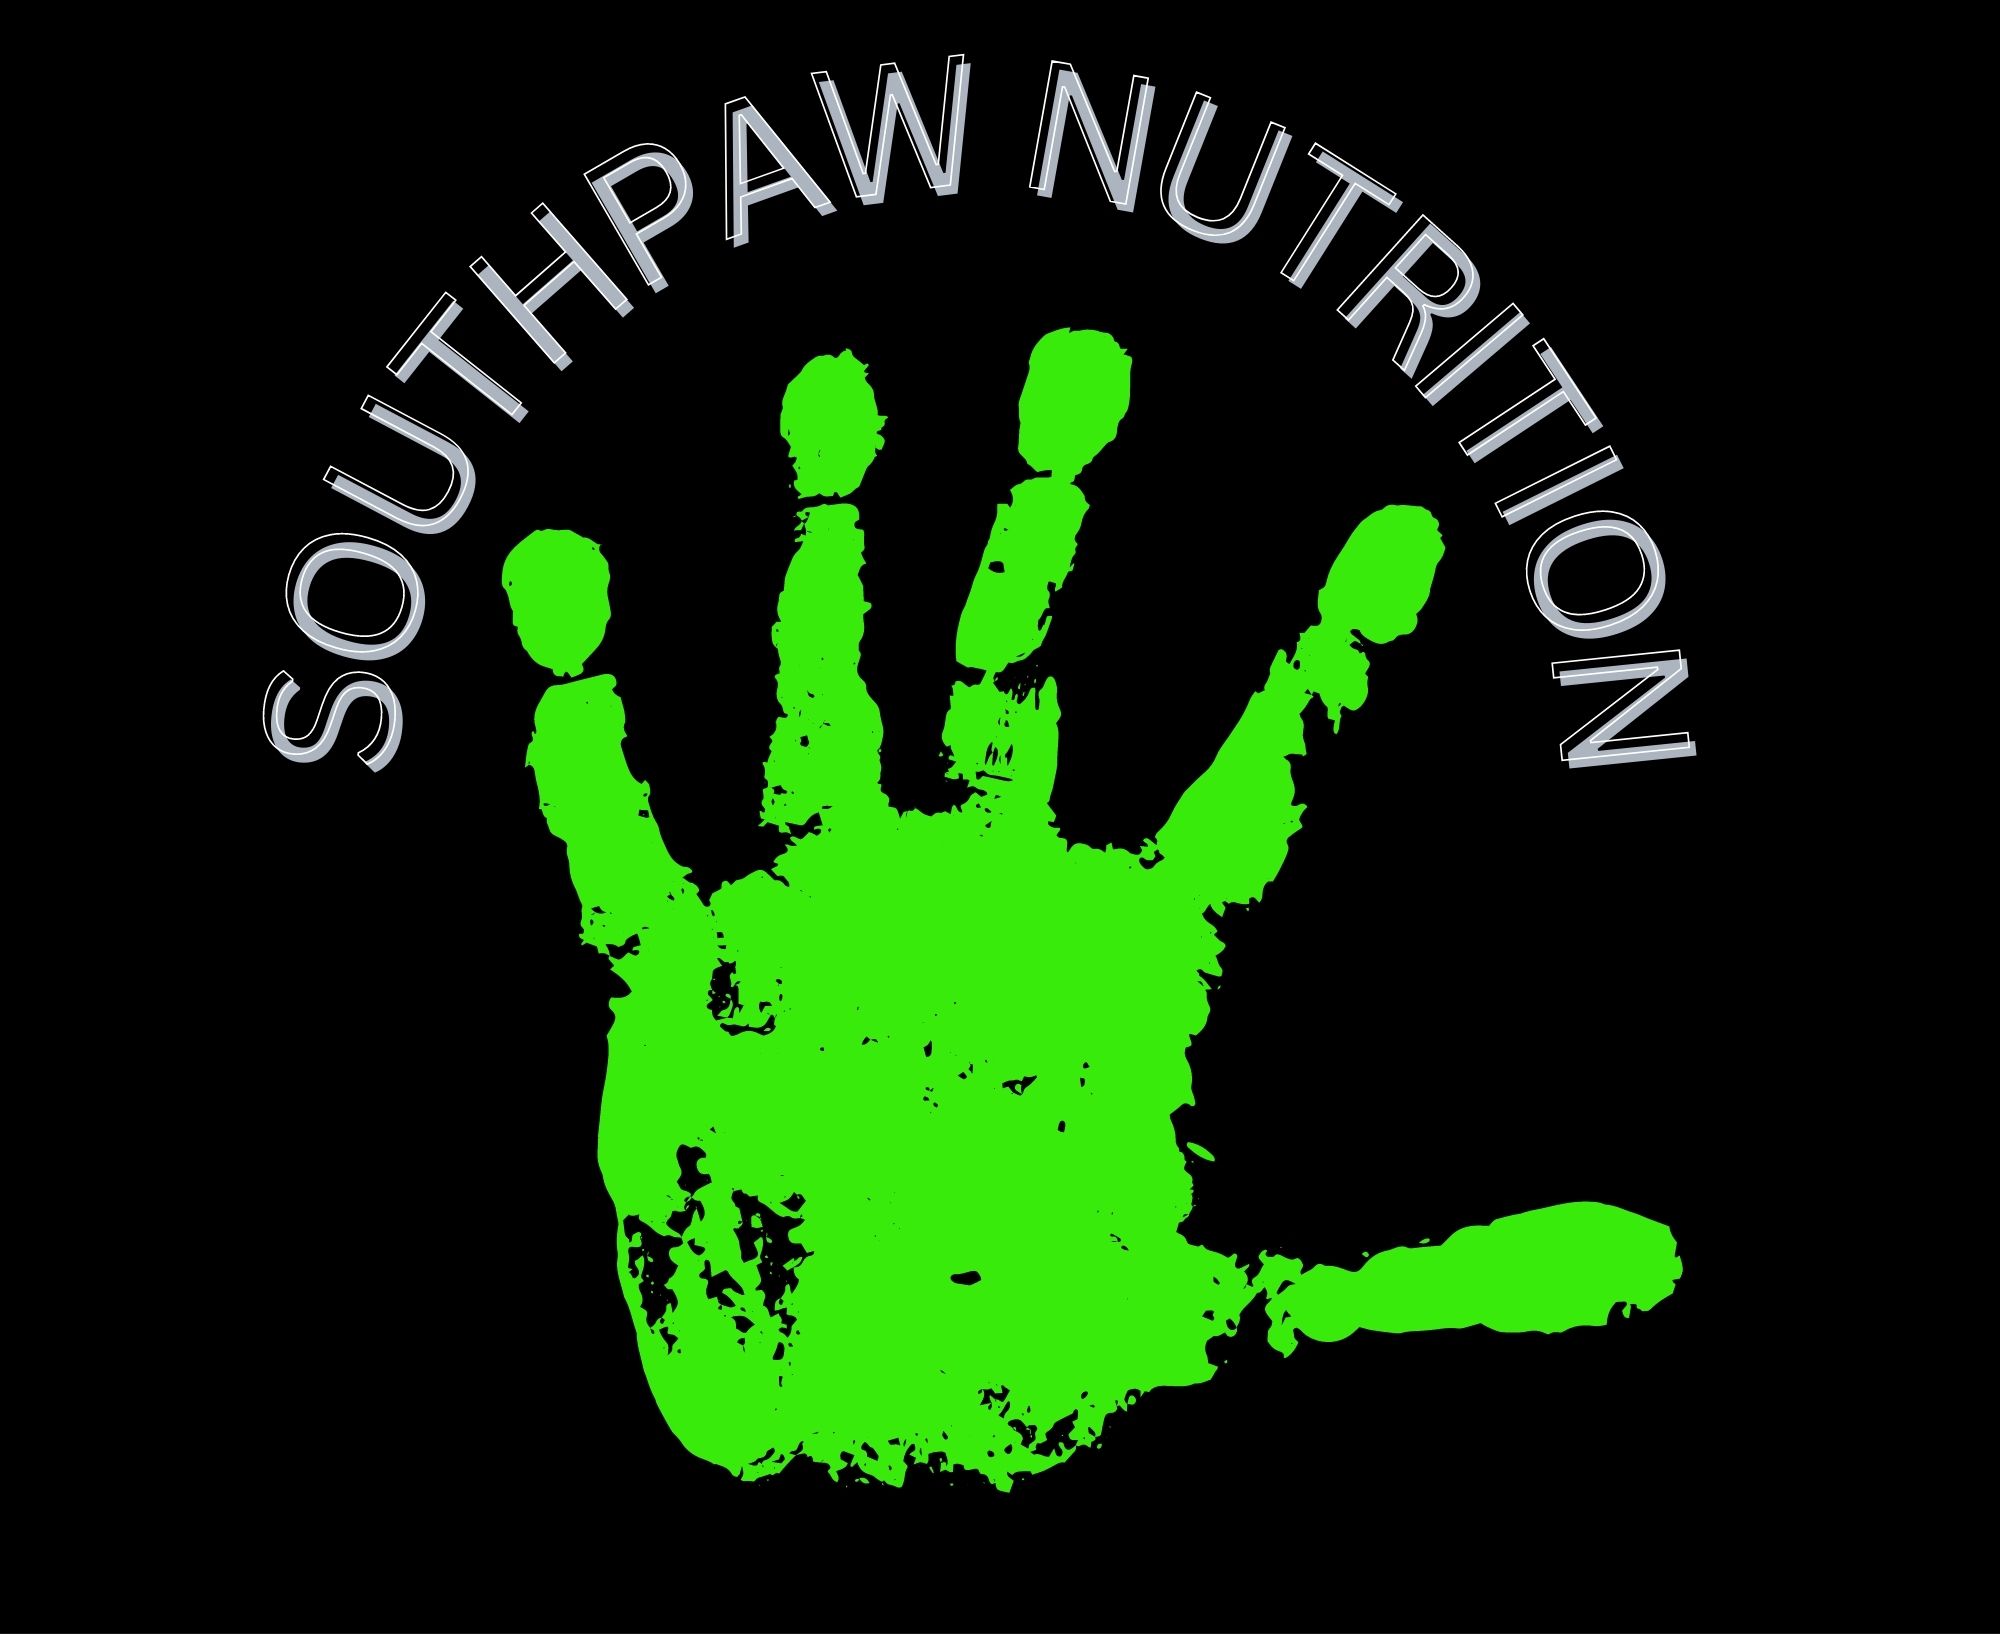 Southpaw Nutrition